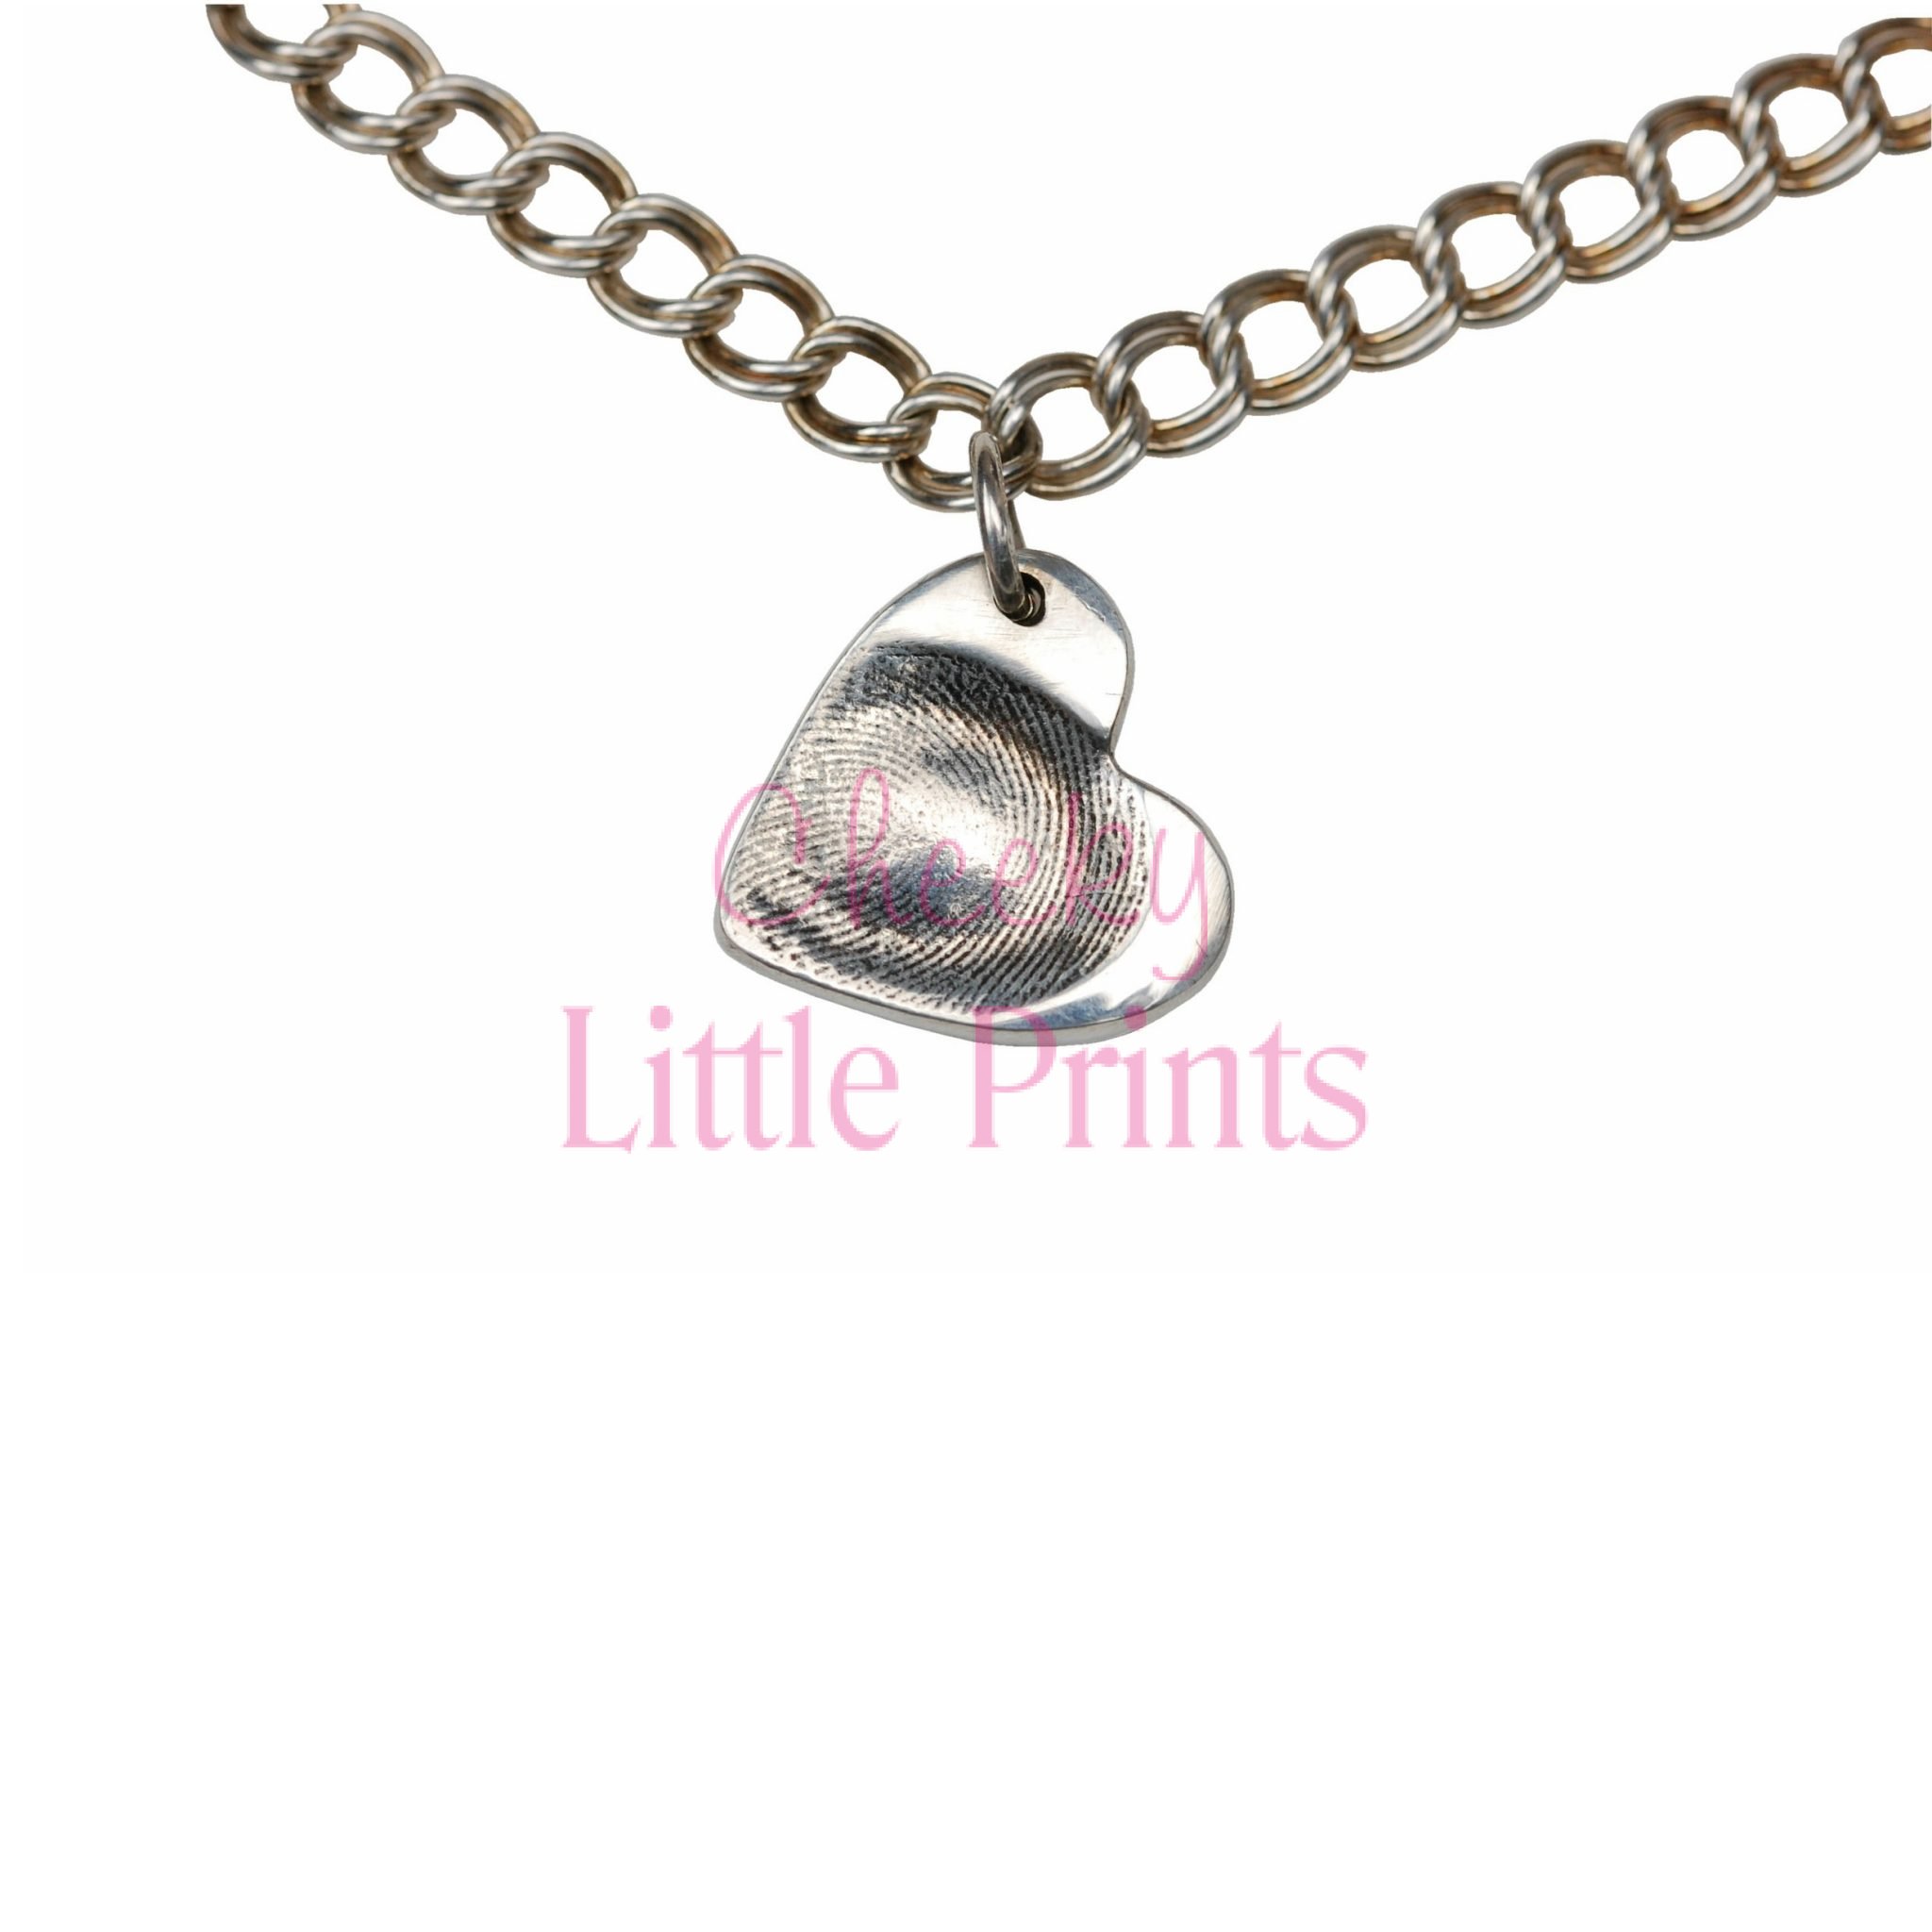 Small silver heart charm with fingerprint